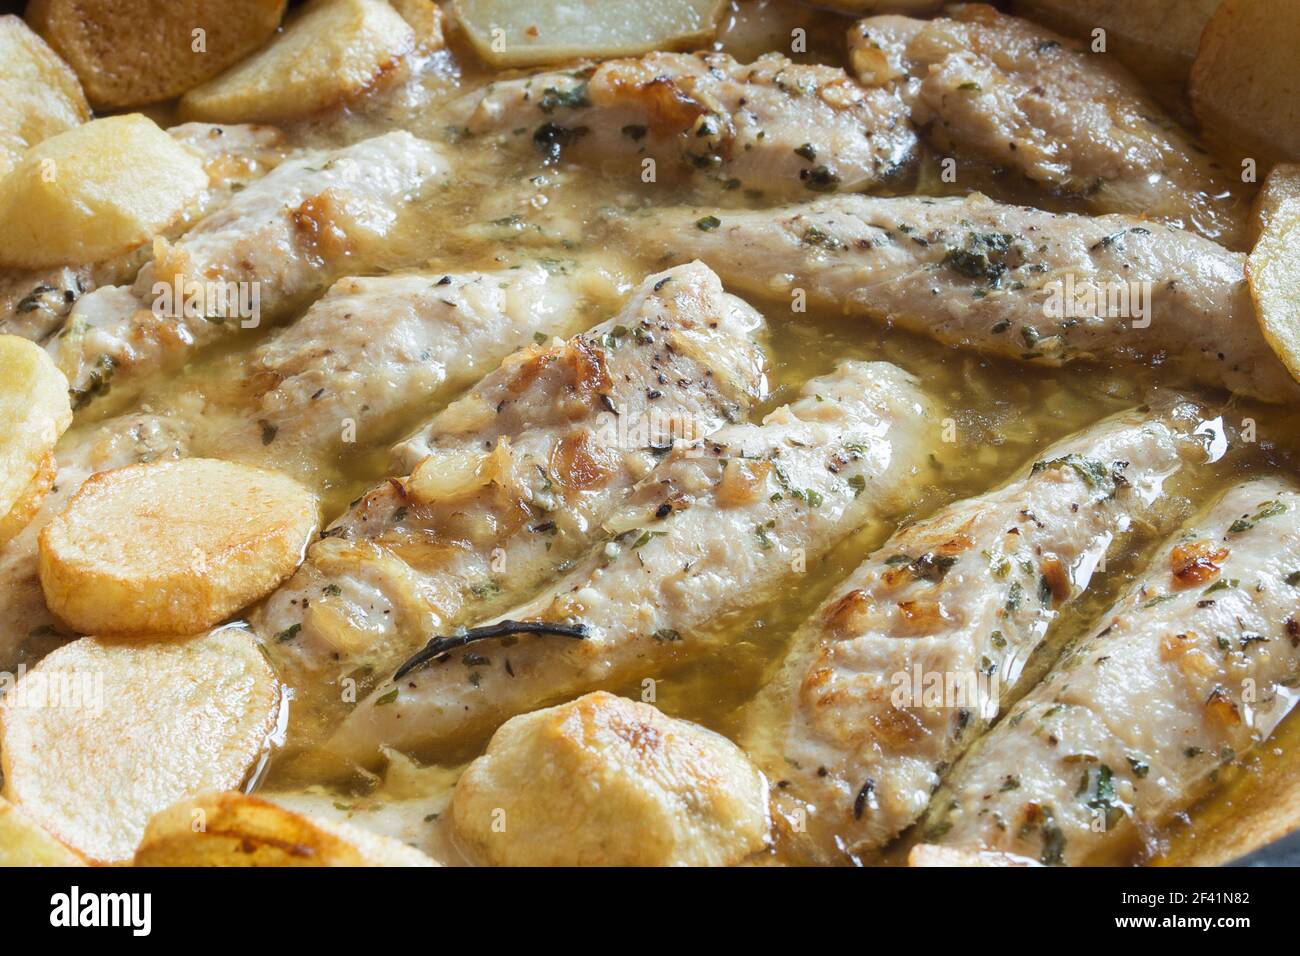 Close-up of chicken fillets with garlic and spices in a green sauce accompanied by baked potatoes. Healthy food. Stock Photo